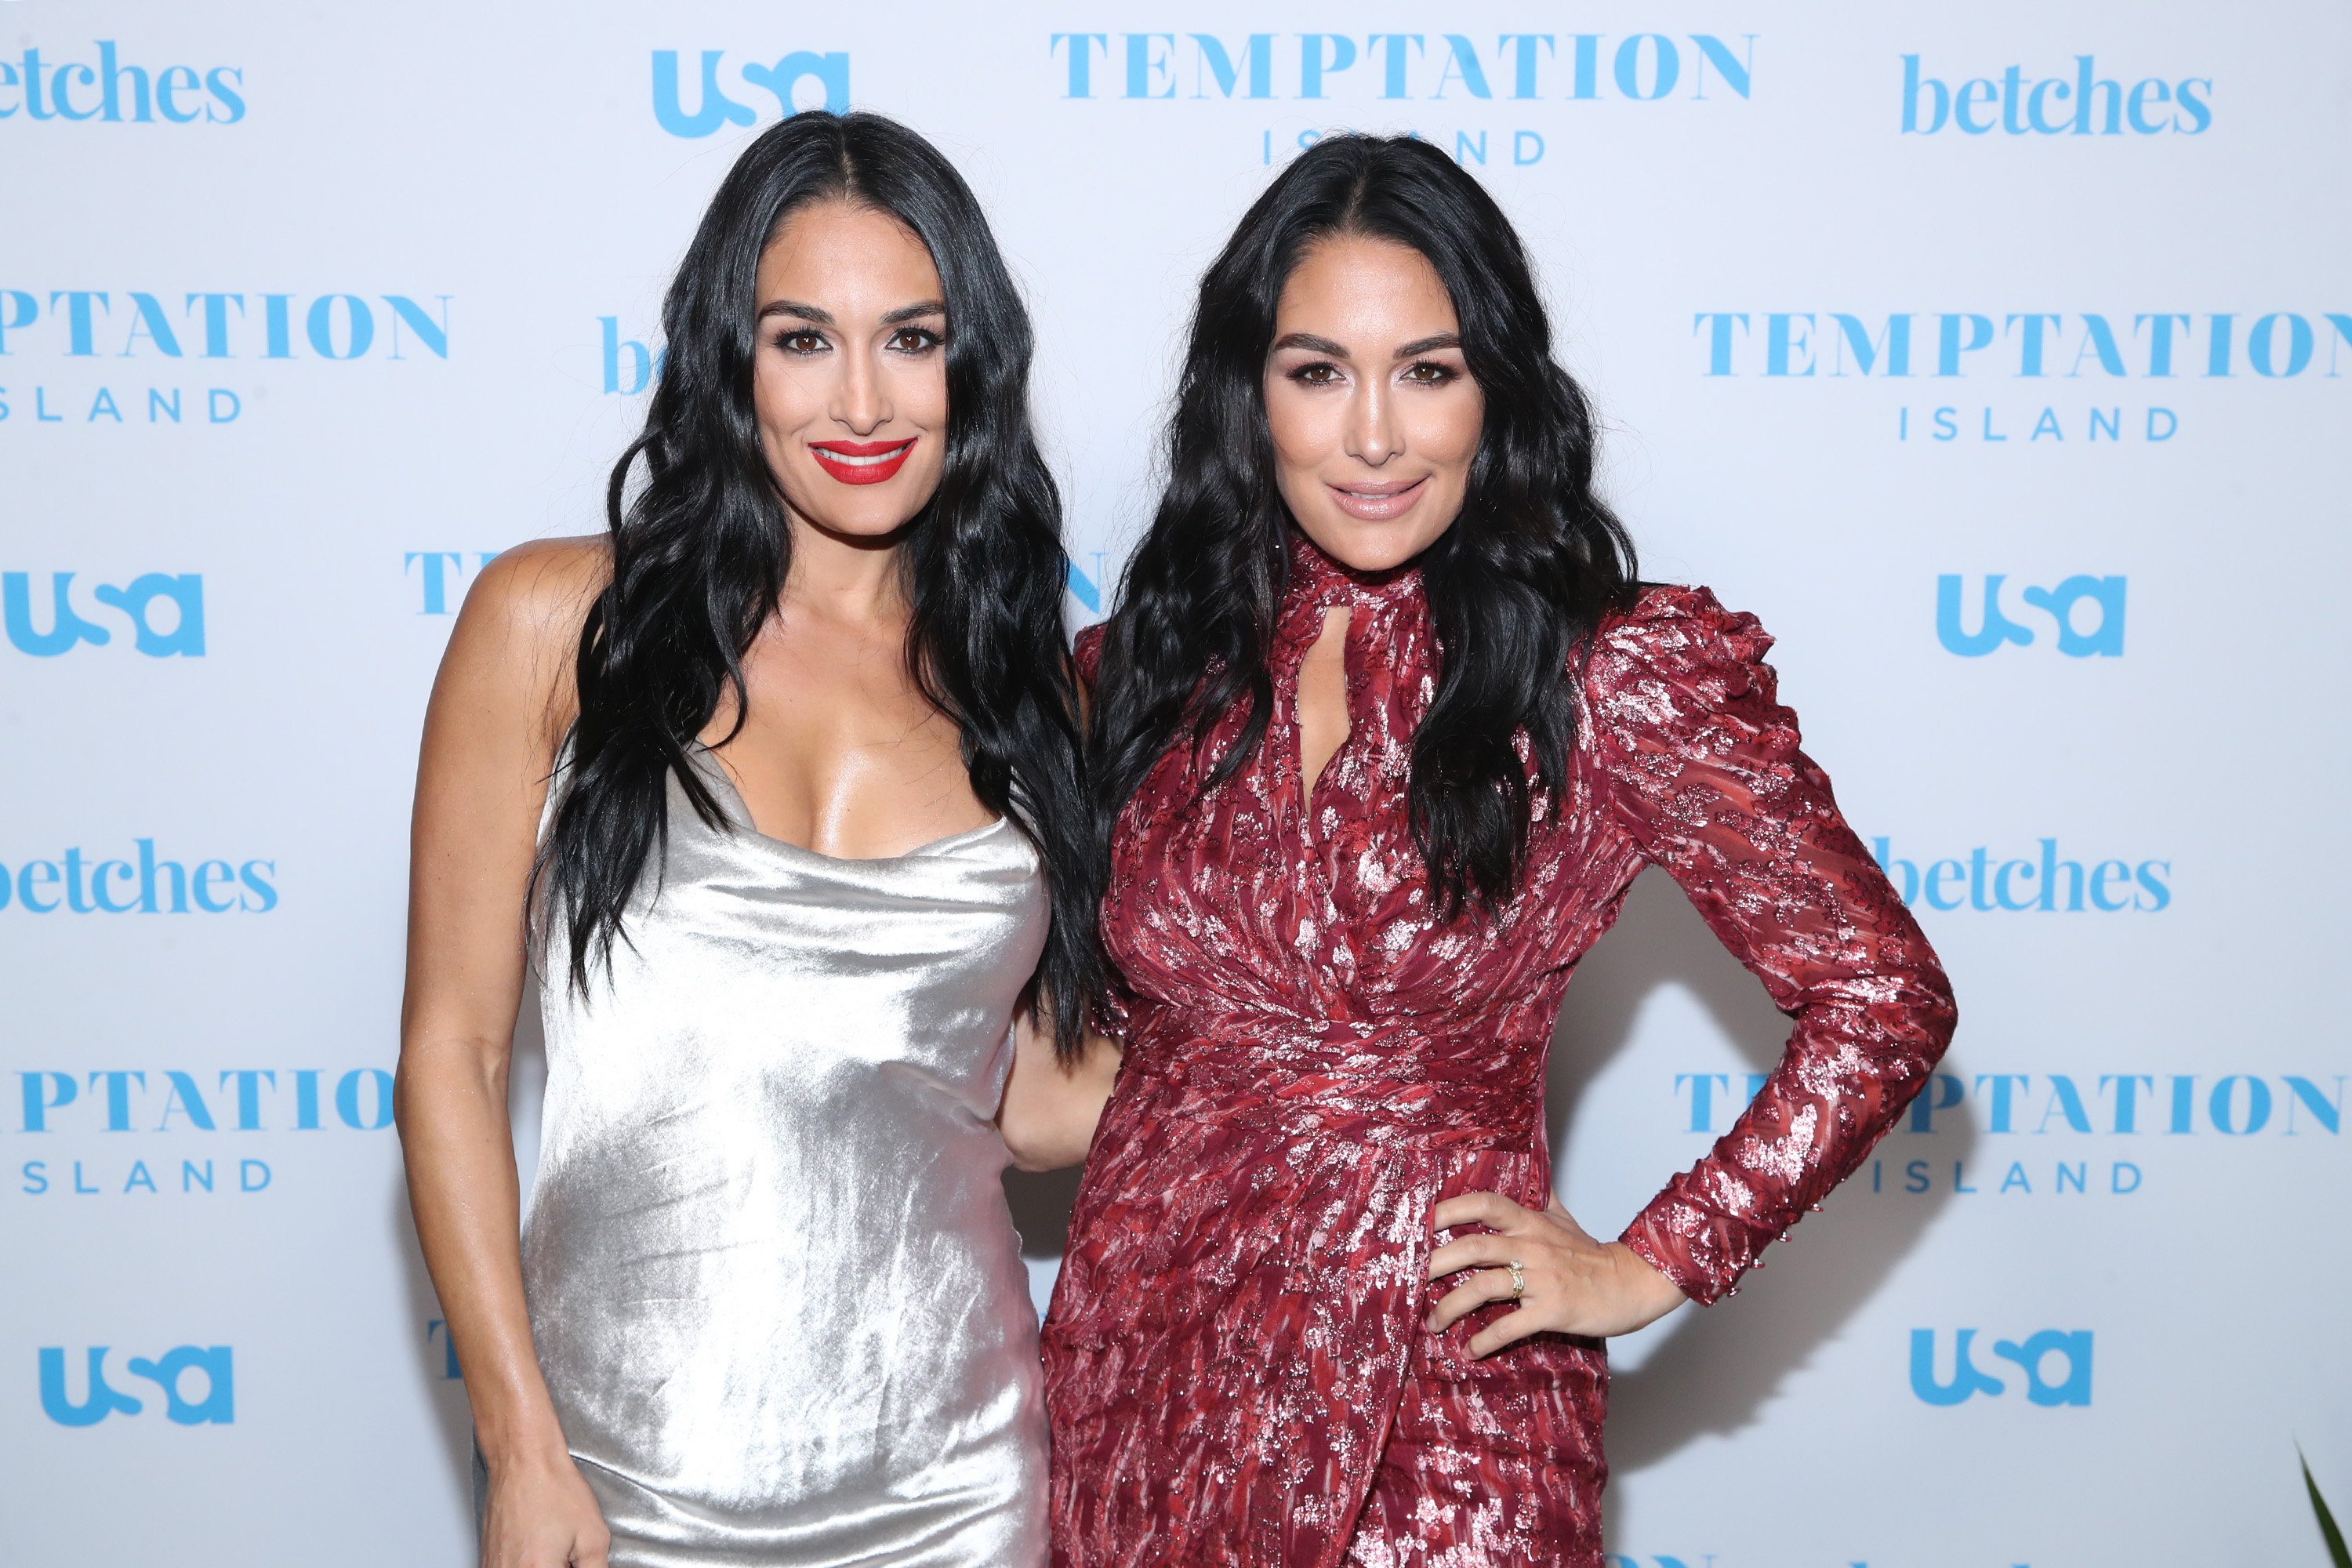 Bella Baby Boom! Nikki and Brie Welcome Baby Boys Just 1 Day Apart